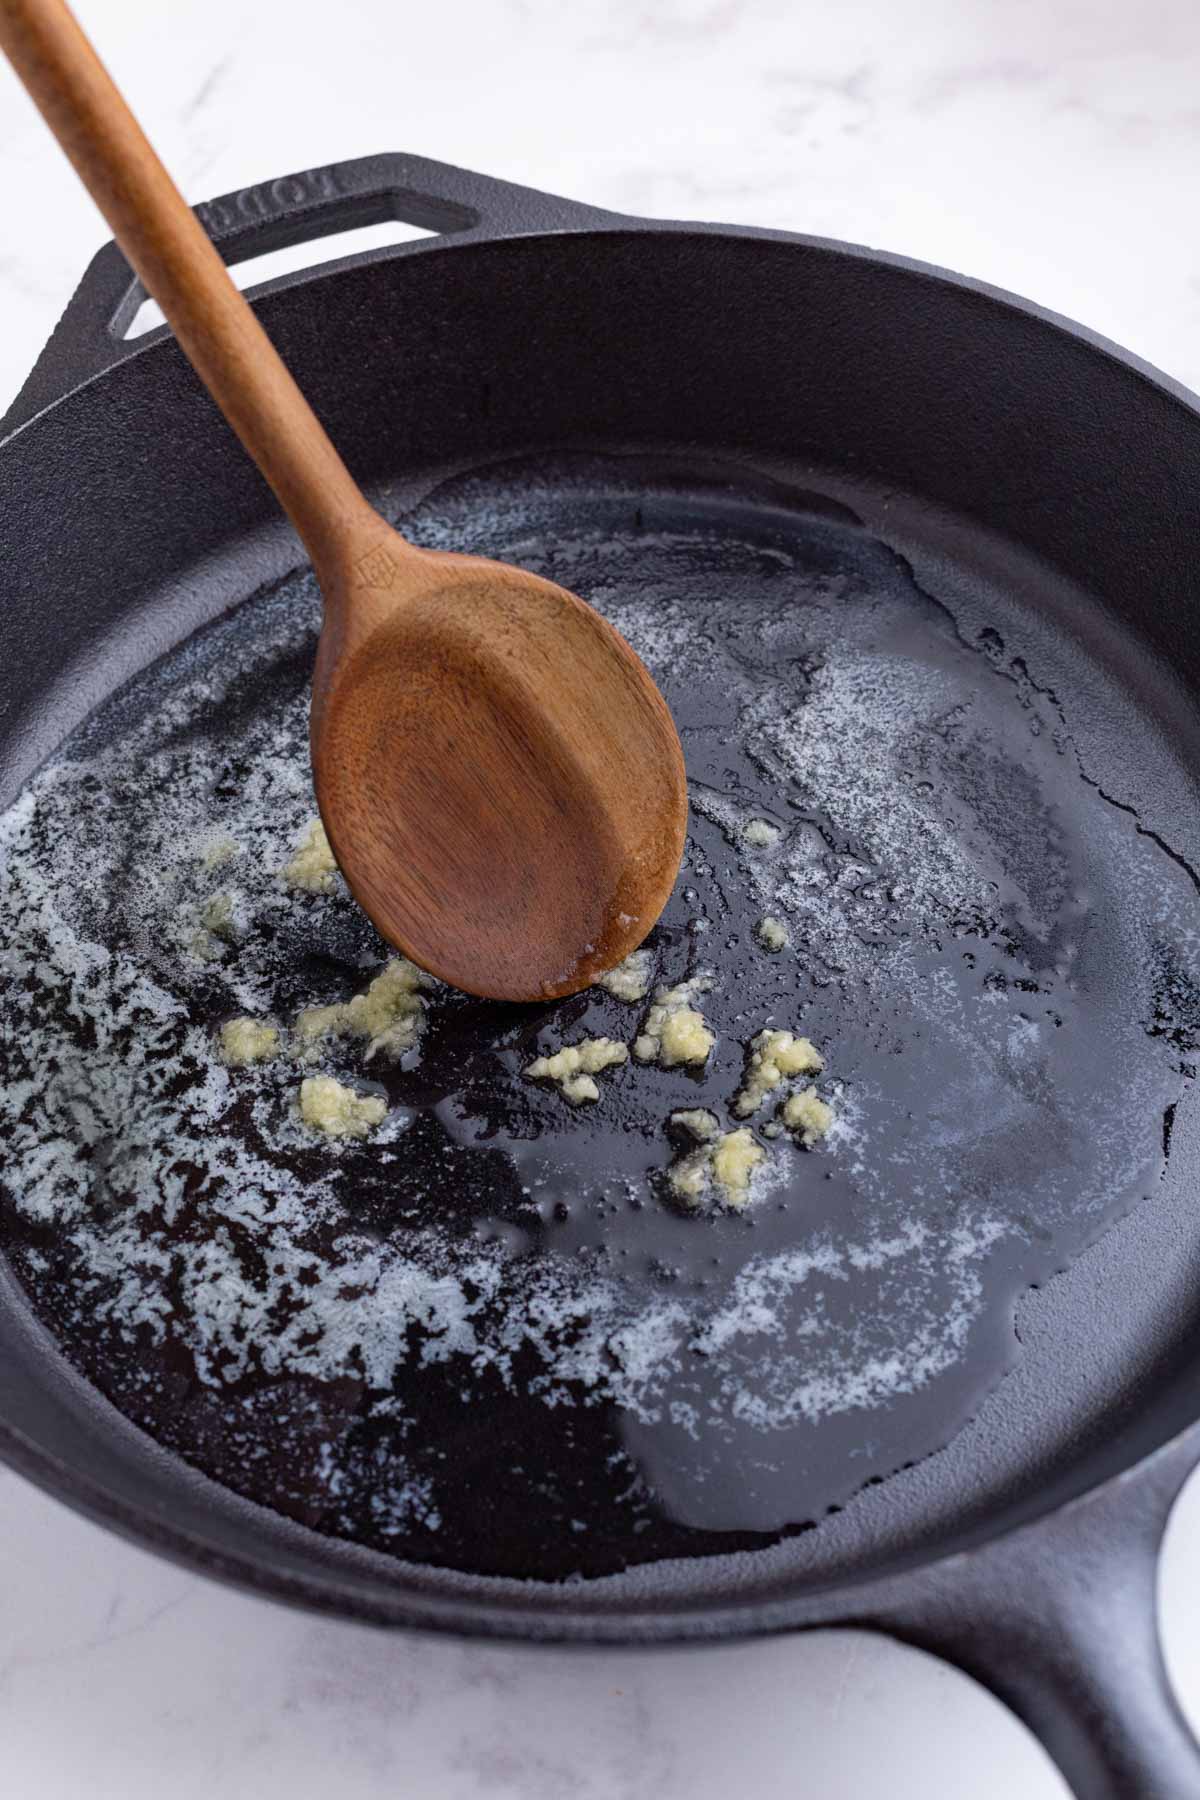 Garlic is sauteed with the butter.